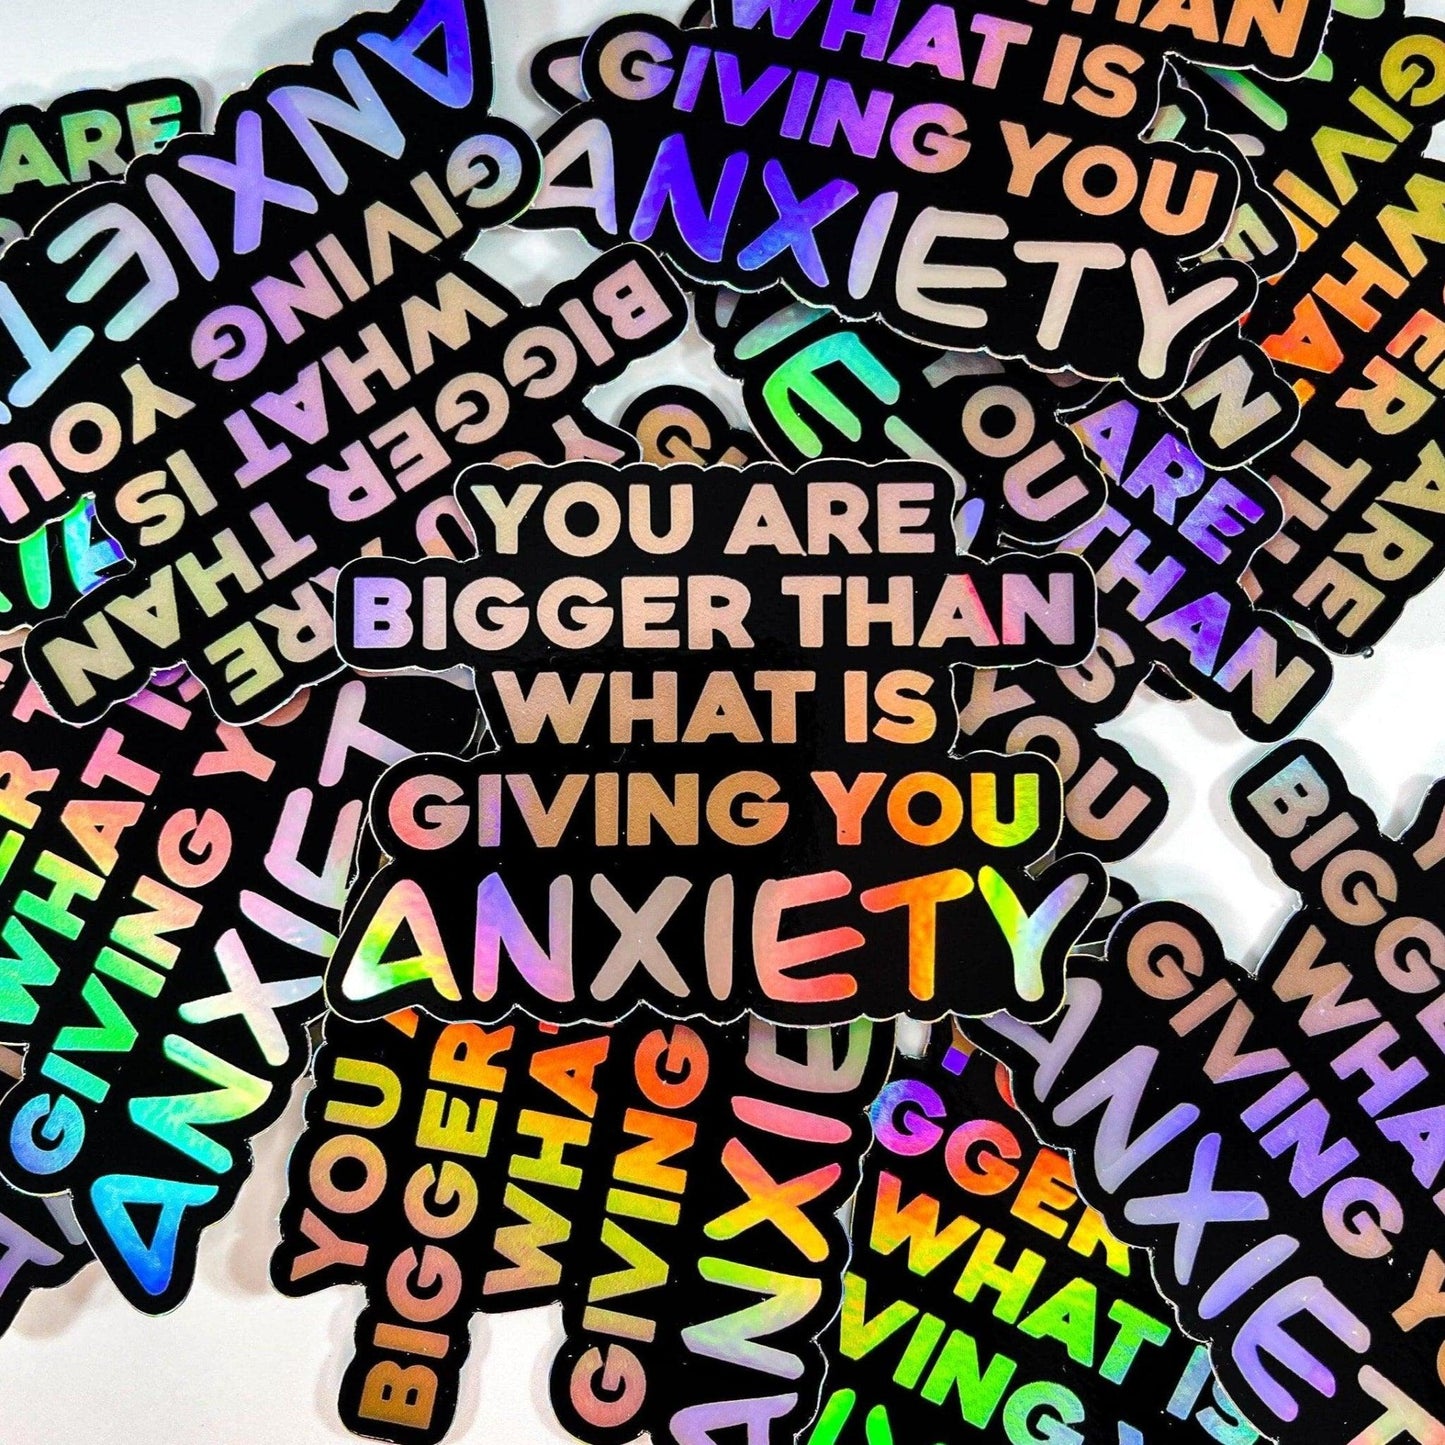 You Are Bigger Than What's Giving You Anxiety Sticker - Sunshine Soul MD